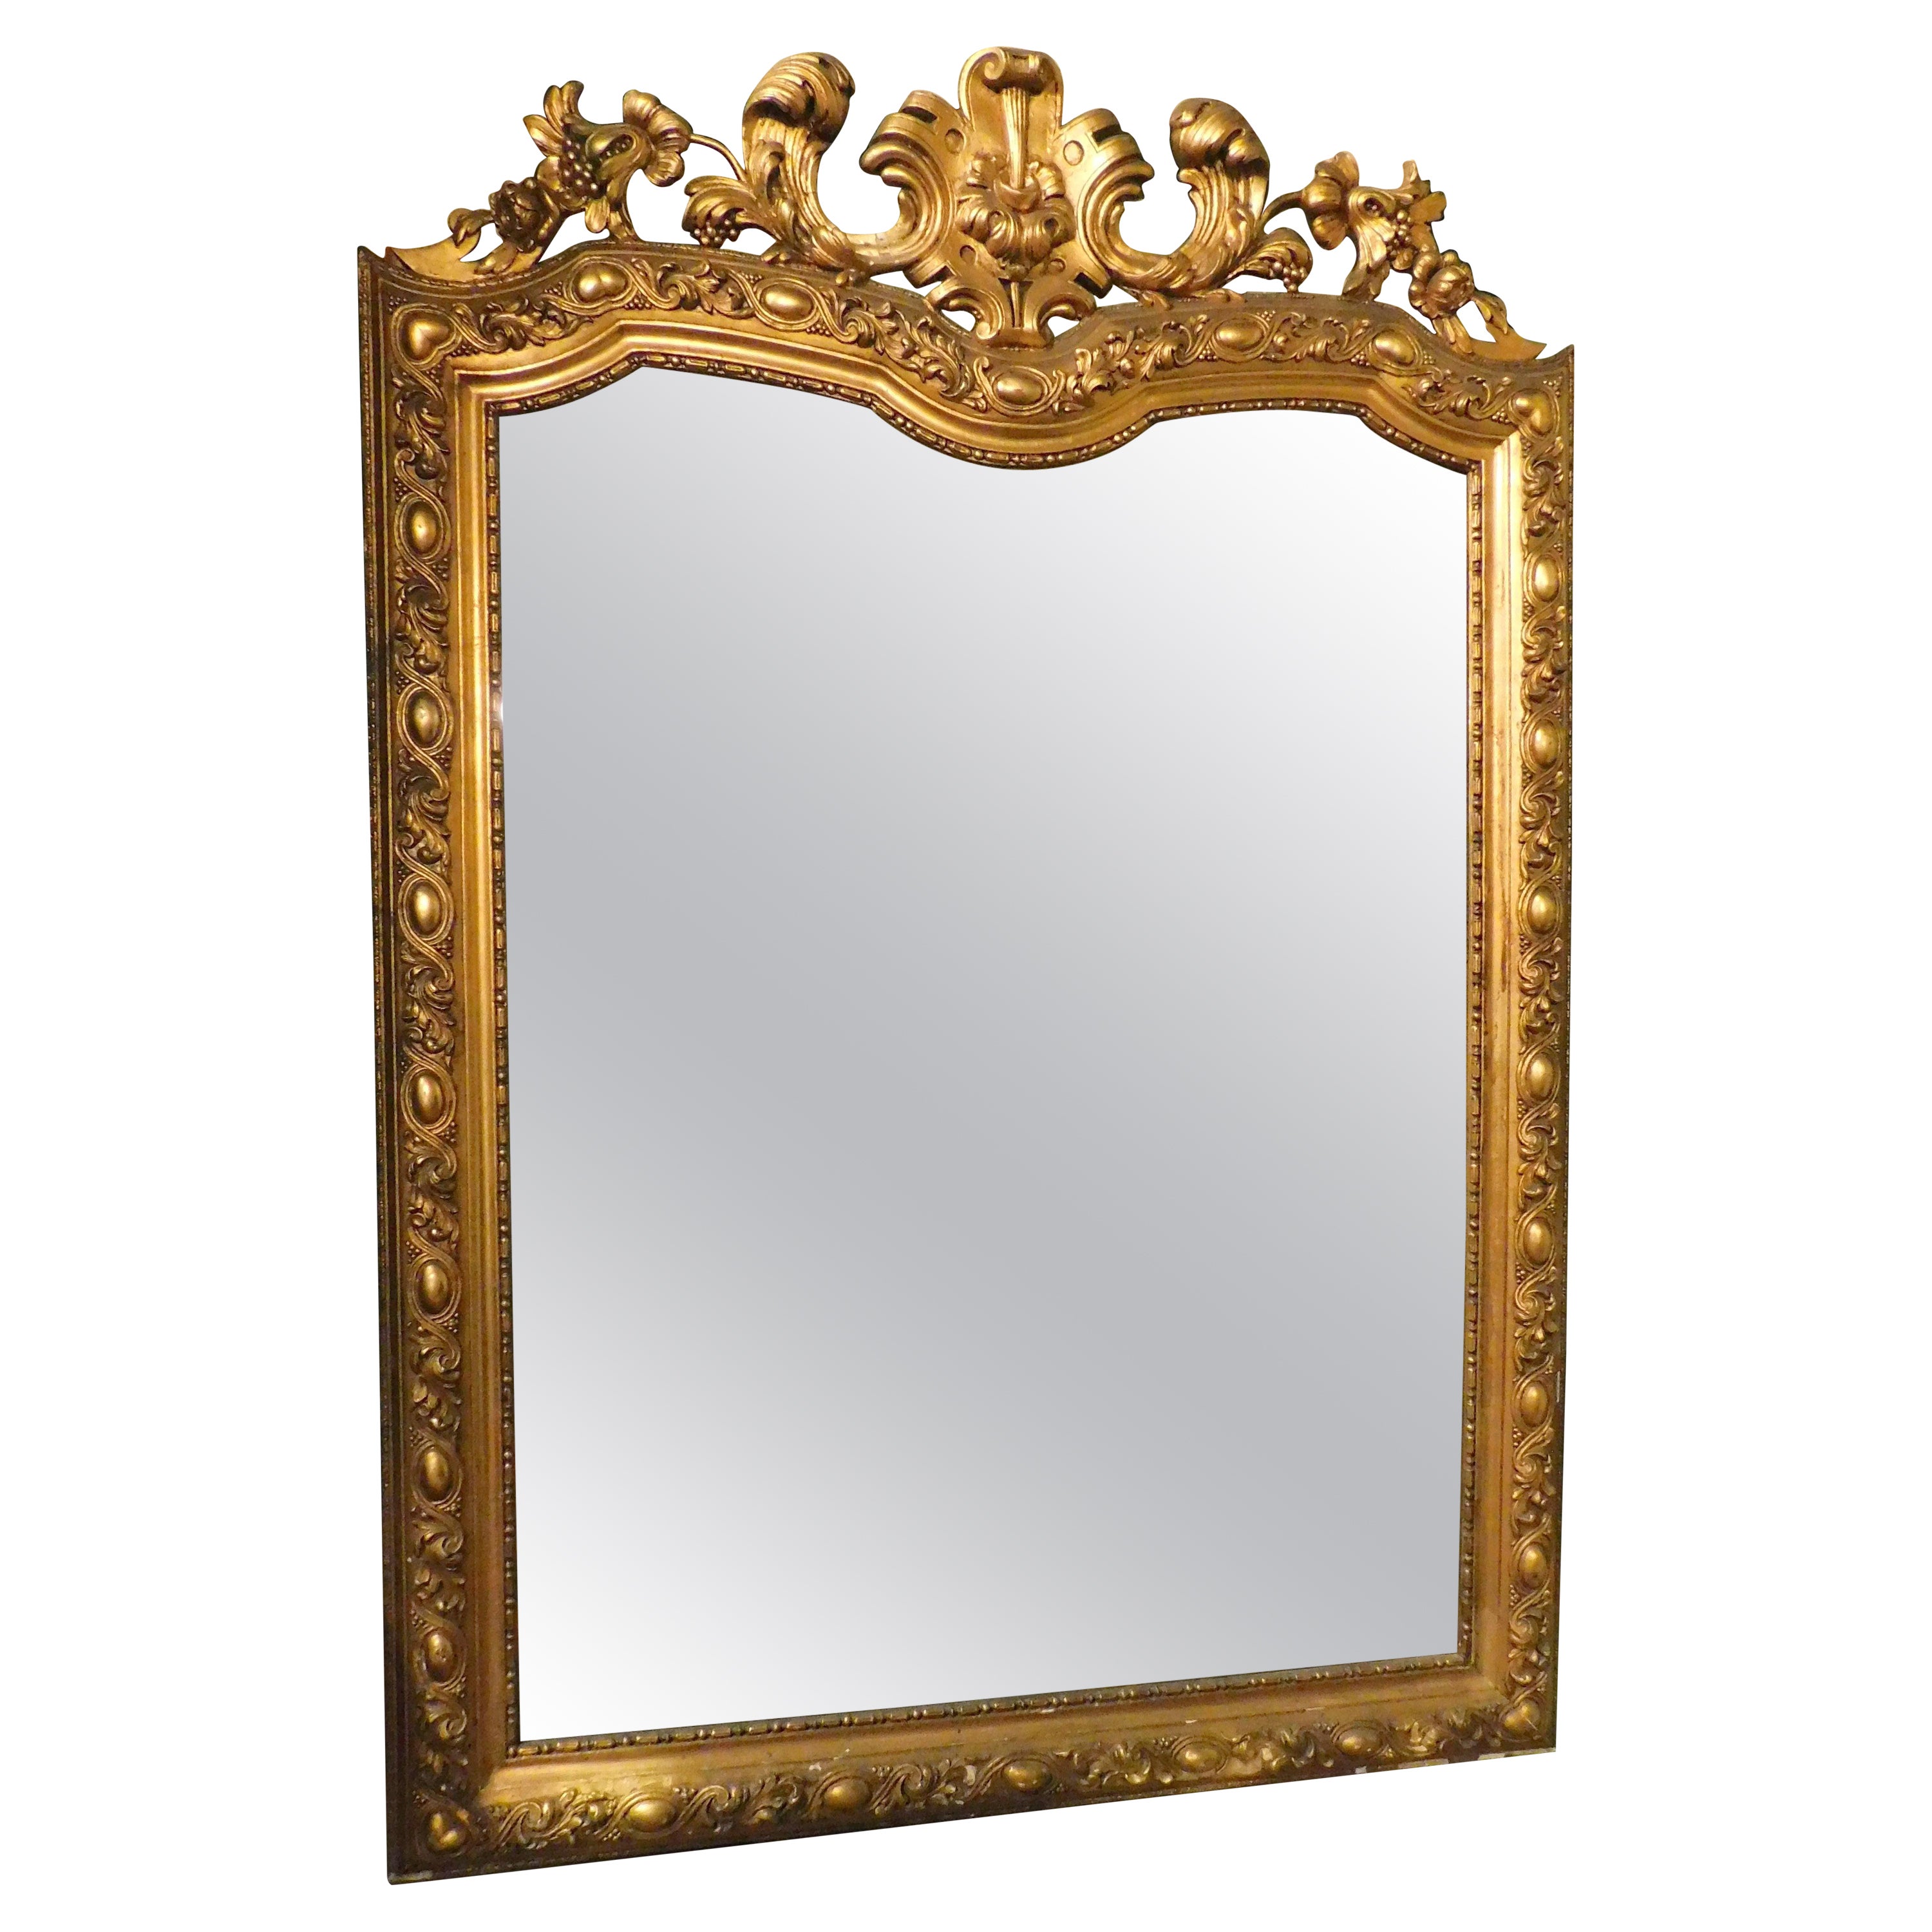 Gilt wooden wall consolle mirror with carved cymatium, Italy